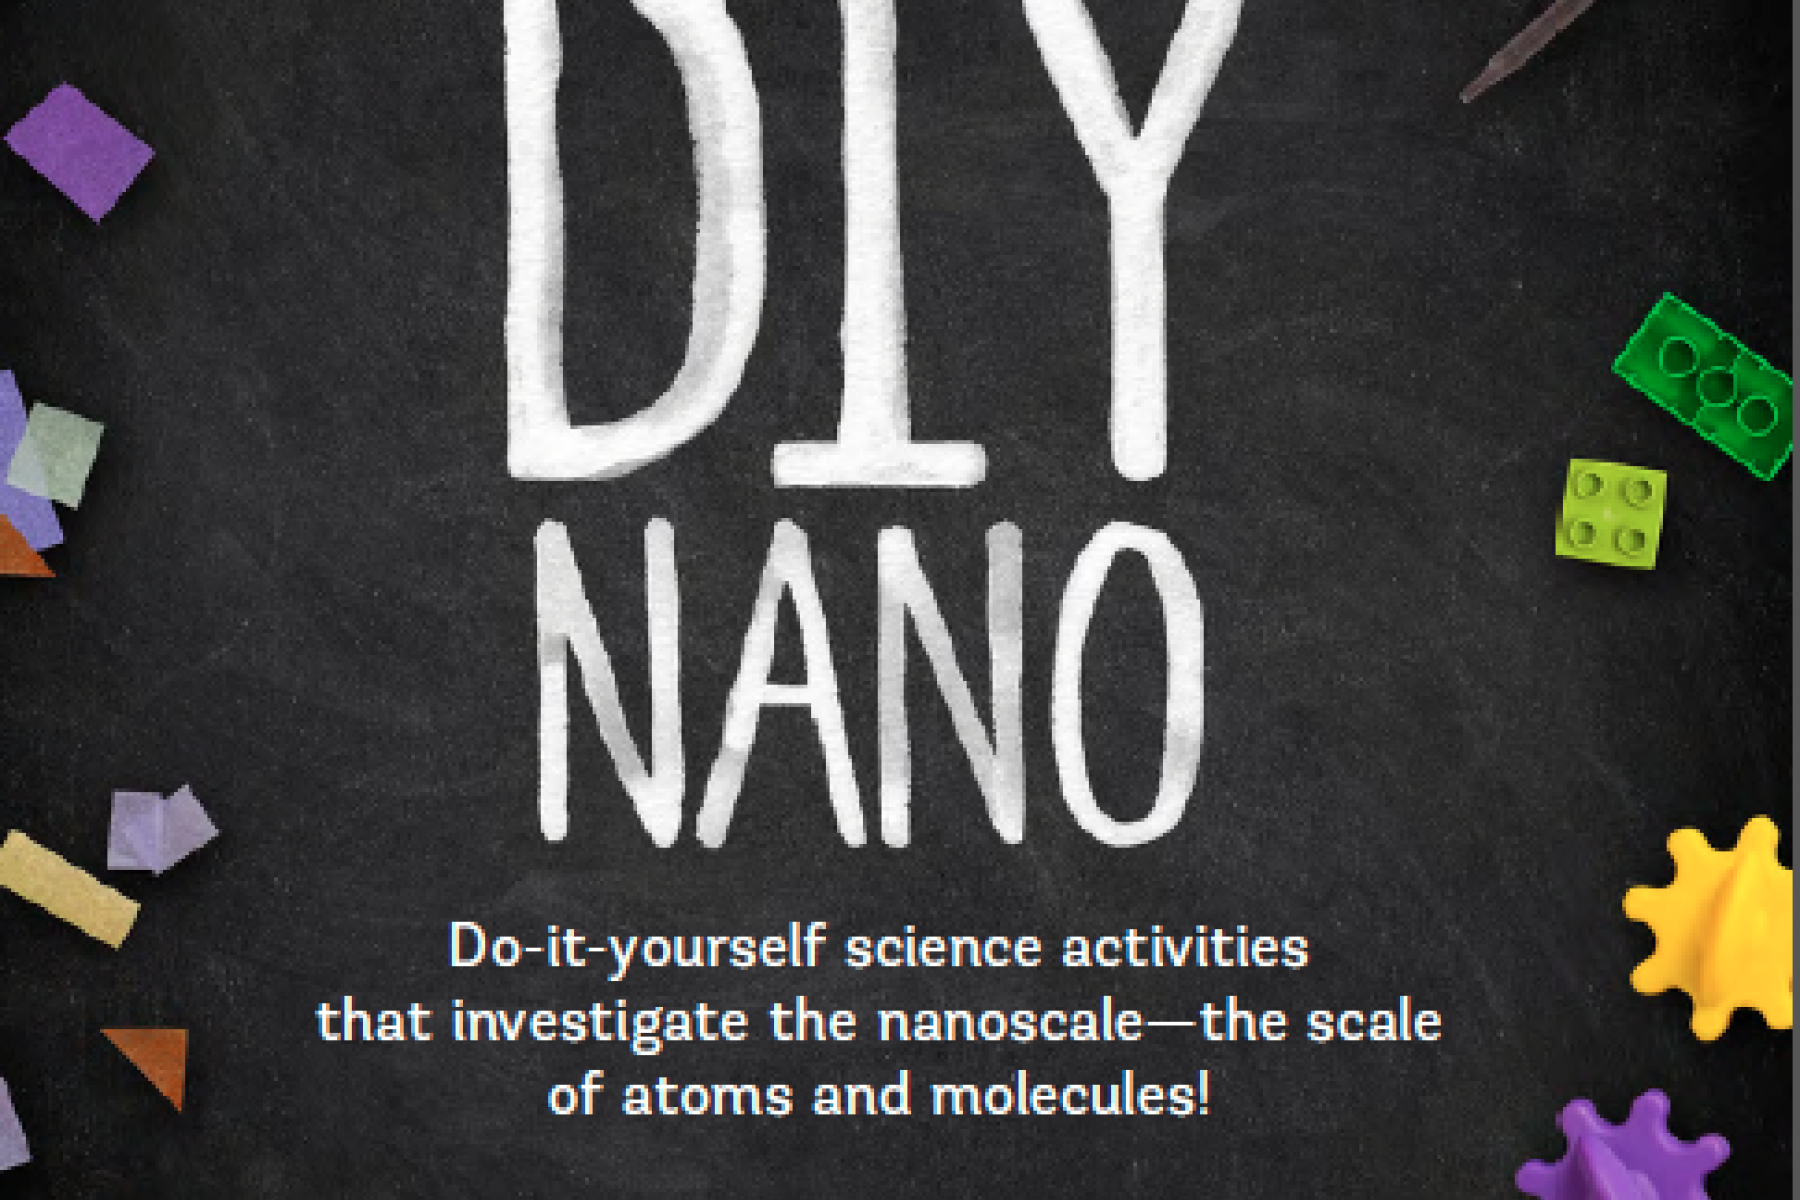 Cover of a book labeled DIY Nano